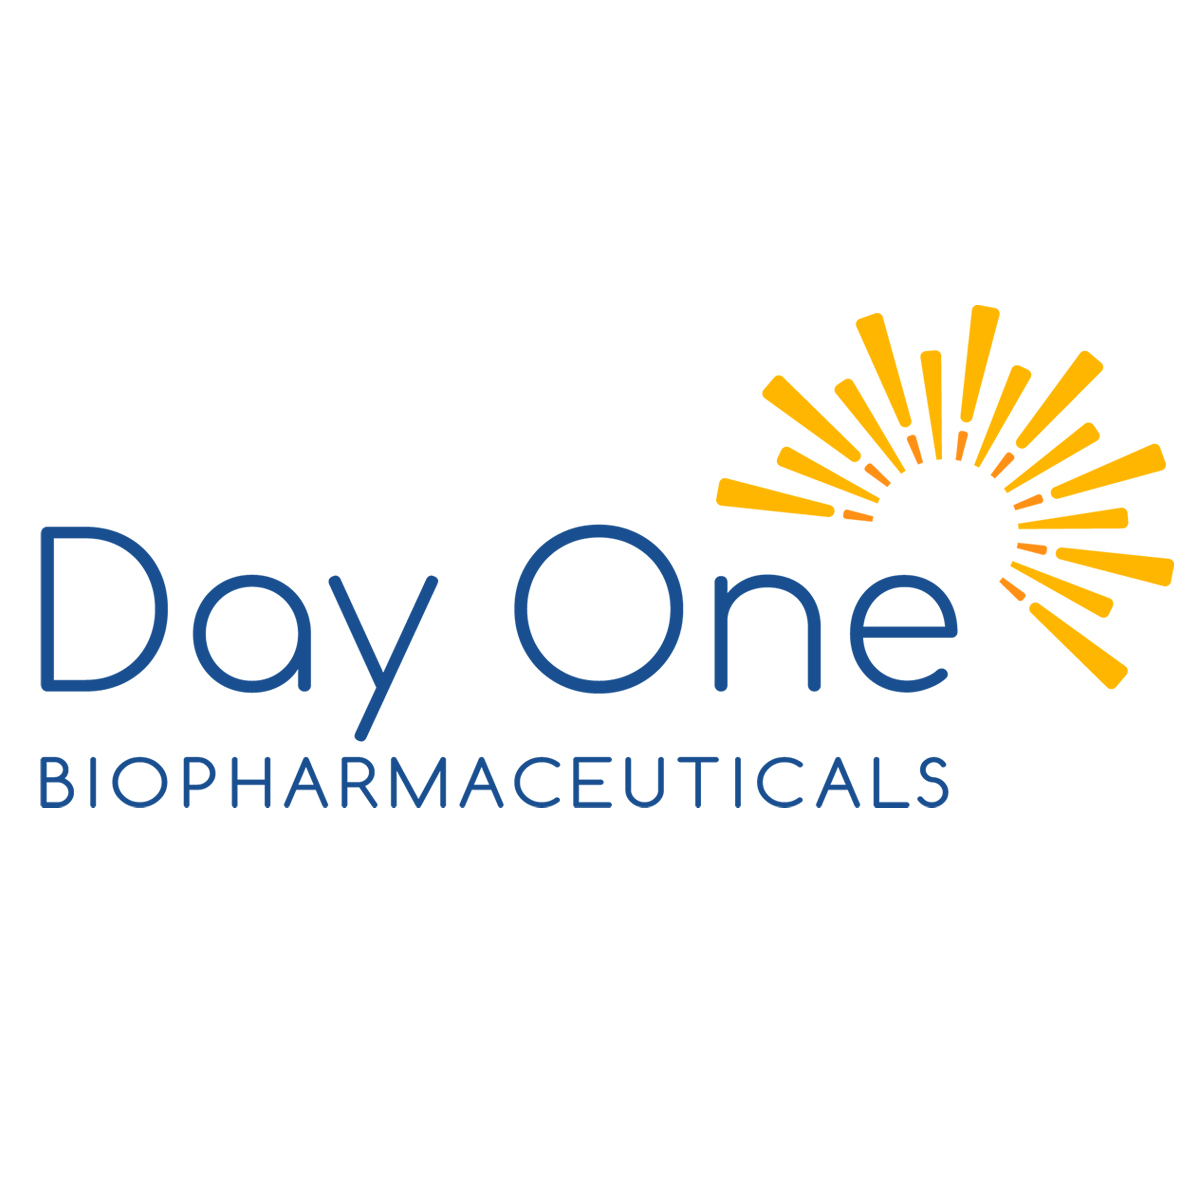 Day One Announces New FIREFLY-1 Data for Tovorafenib (DAY101) and Initiation of Rolling NDA Submission to FDA for Relapsed or Progressive Pediatric Low-Grade Glioma